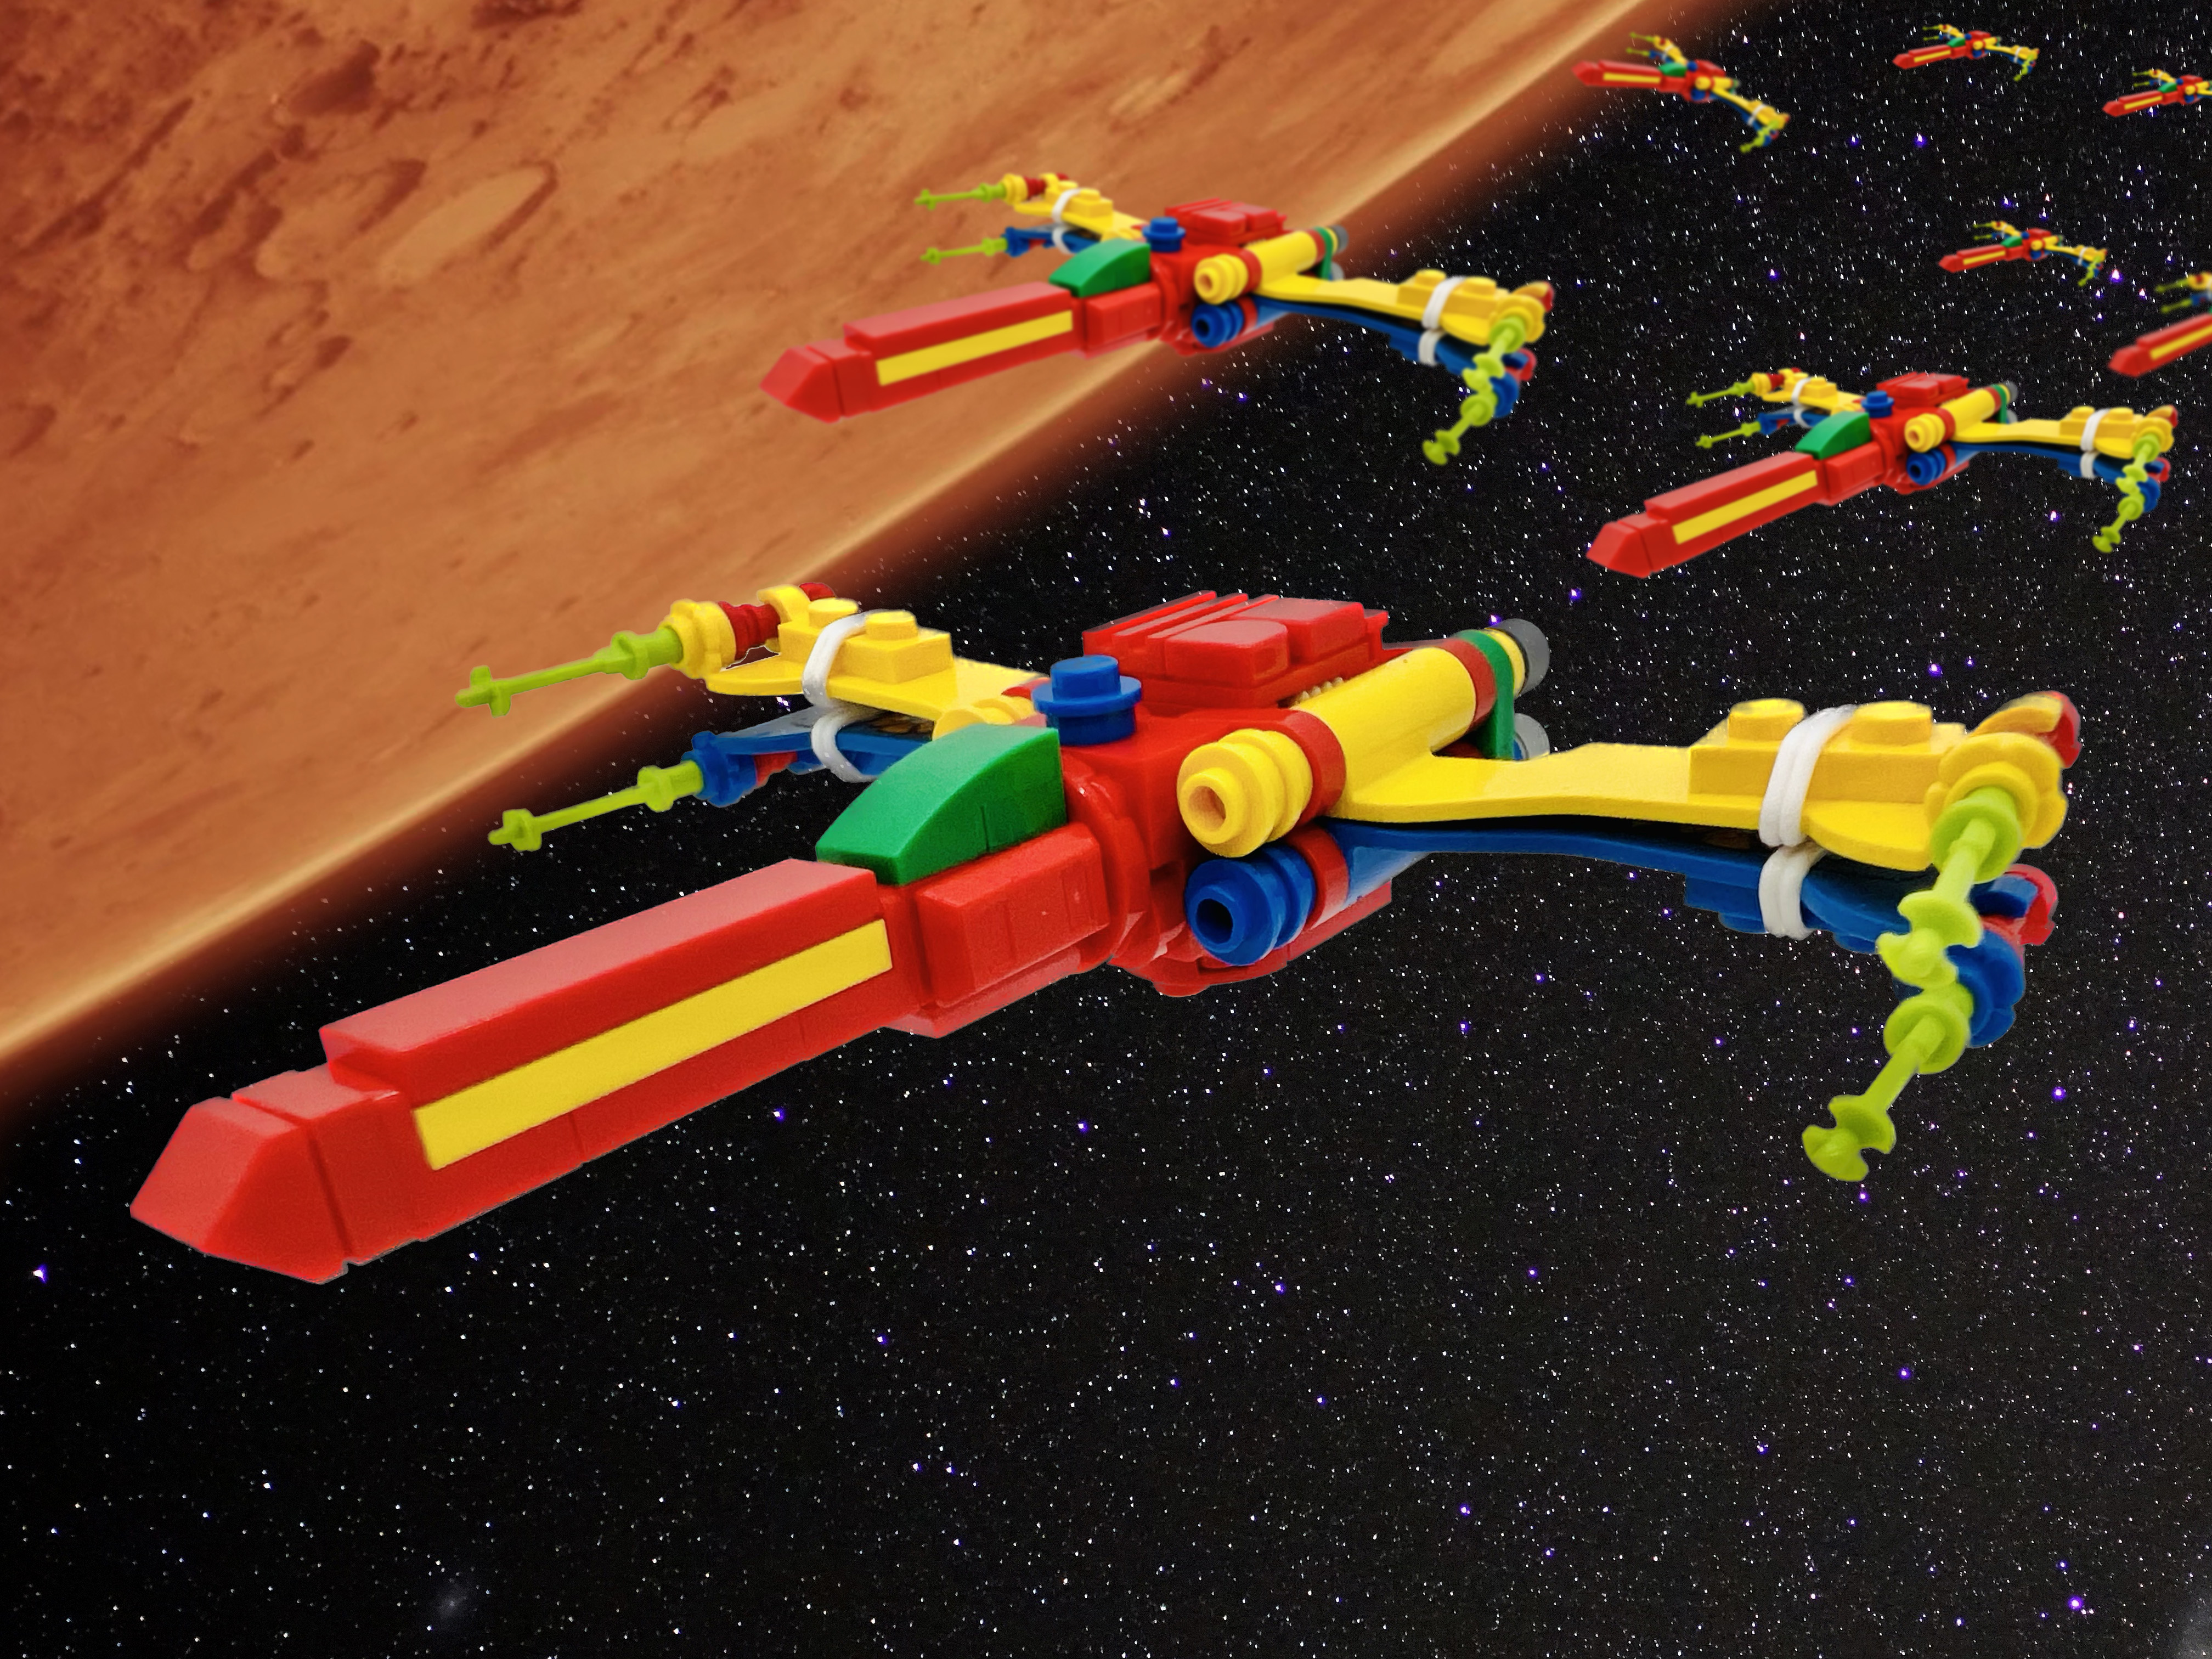 Squadron of microscale starfighters approaching a red planet.